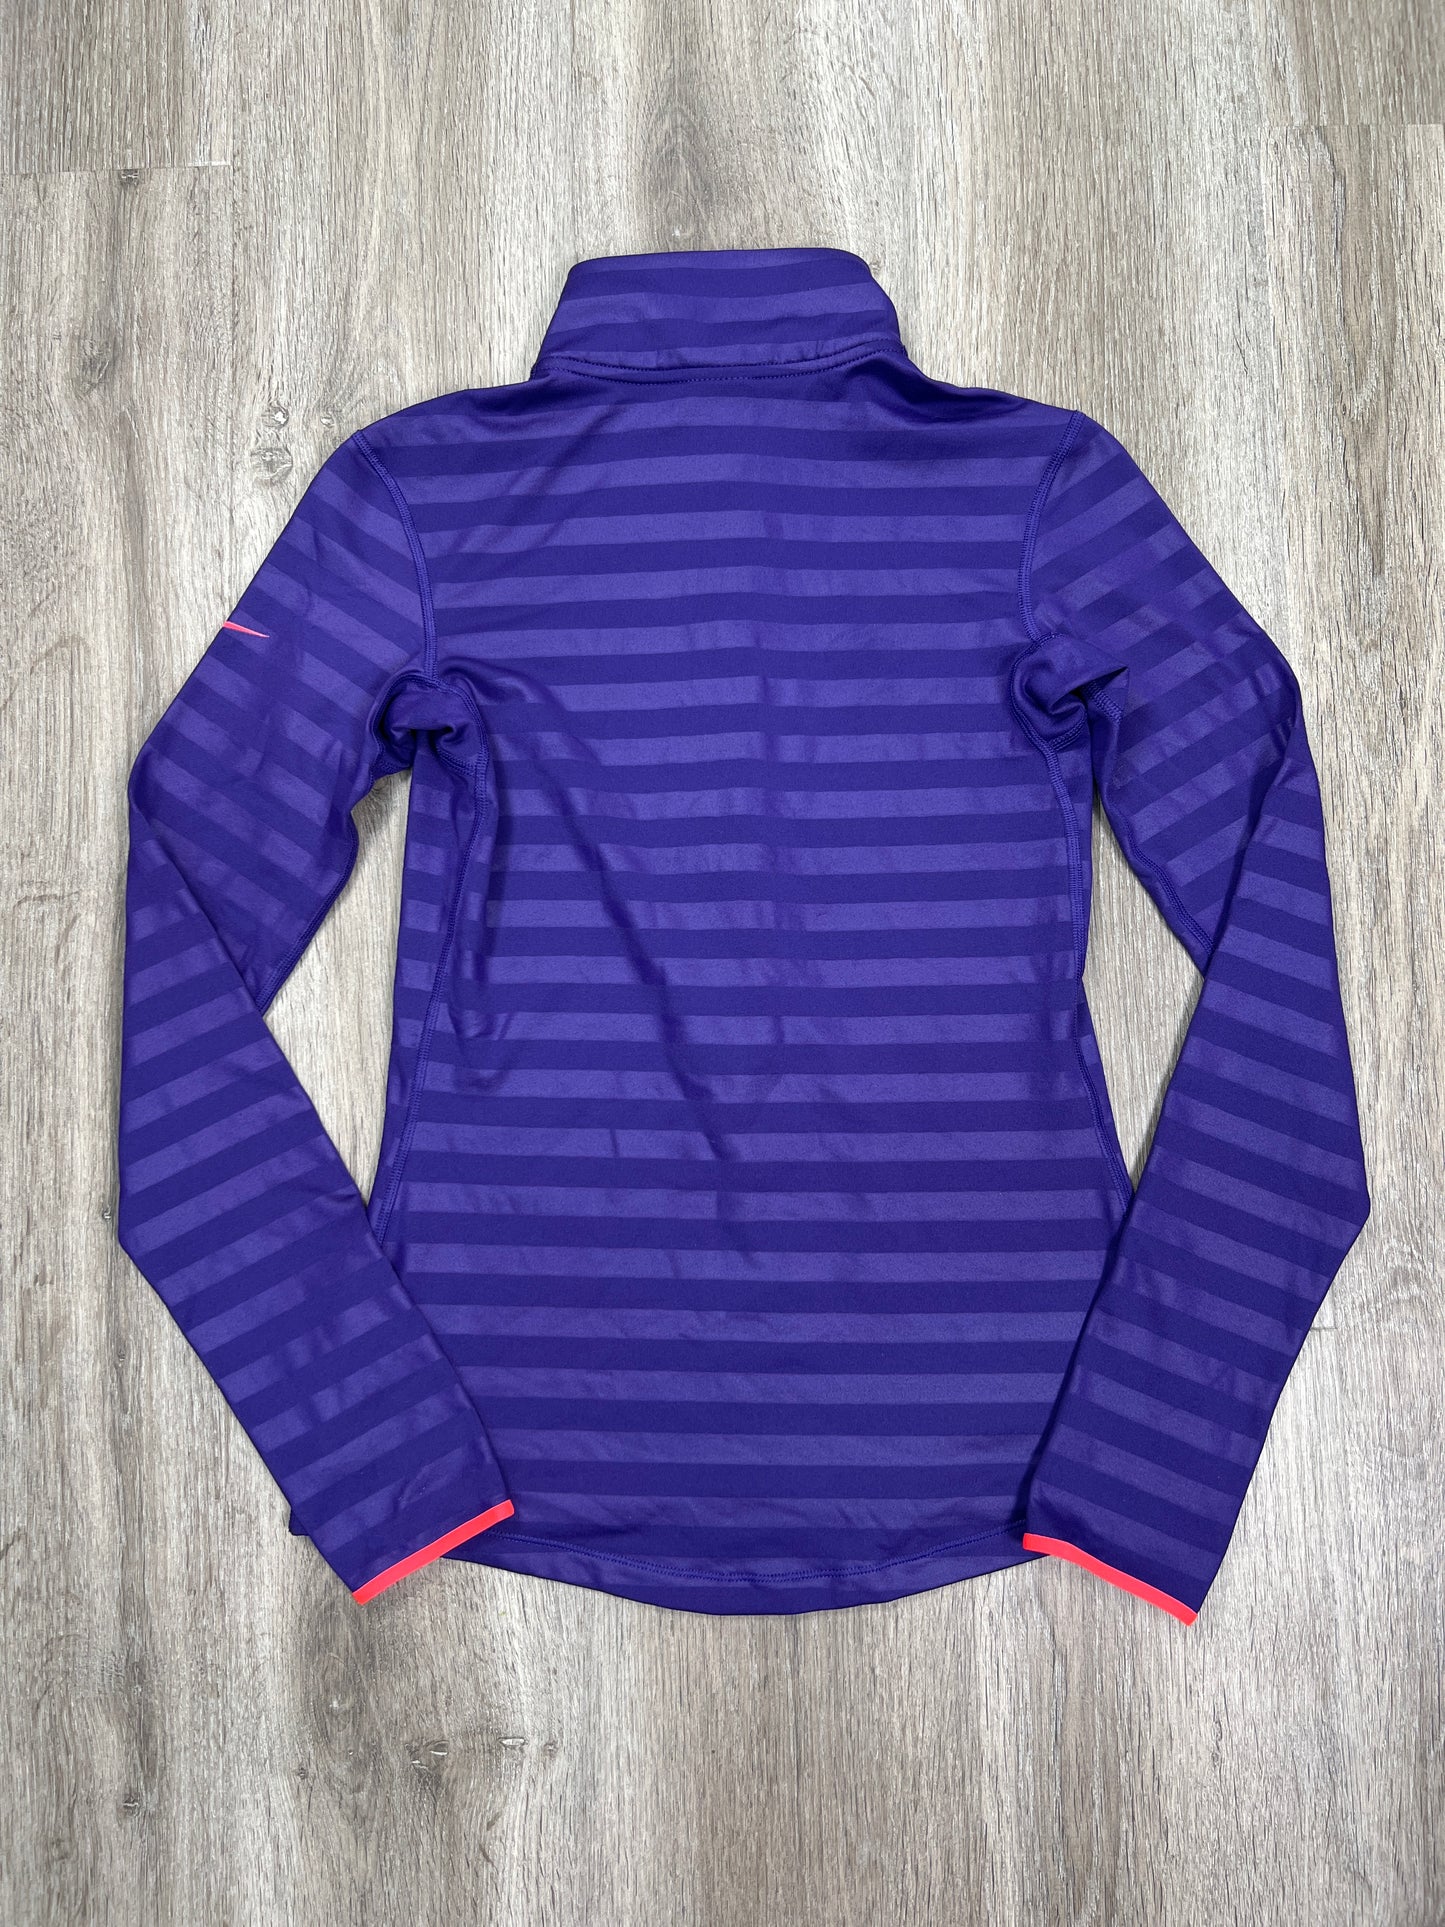 Athletic Top Long Sleeve Collar By Nike Apparel  Size: S